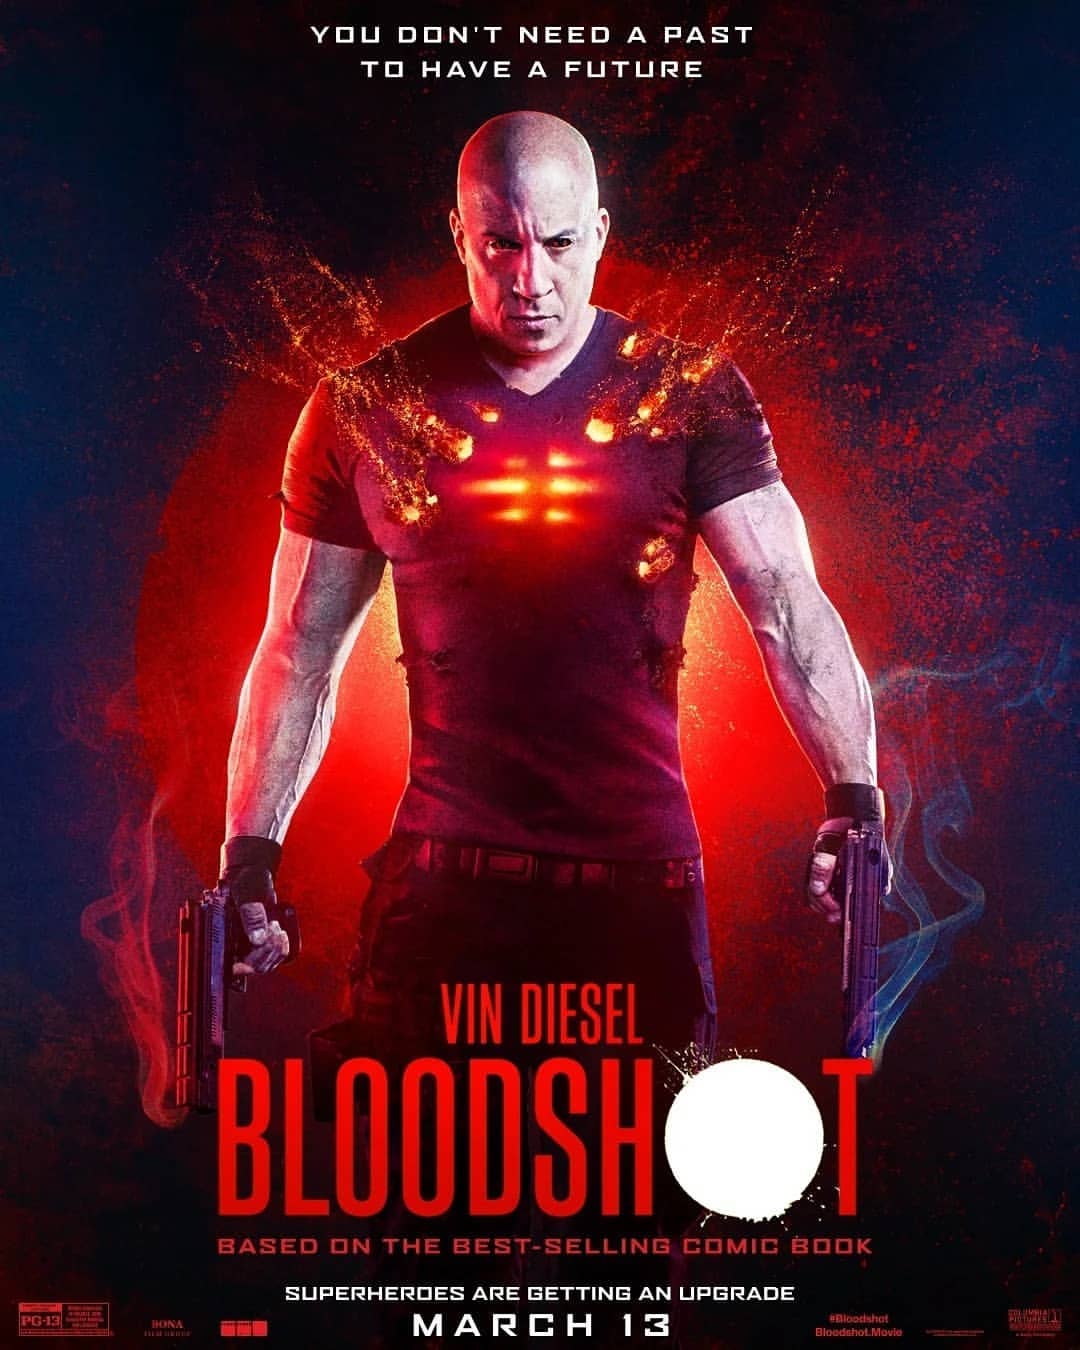 Hollywood’s Movie Review: Bloodshot